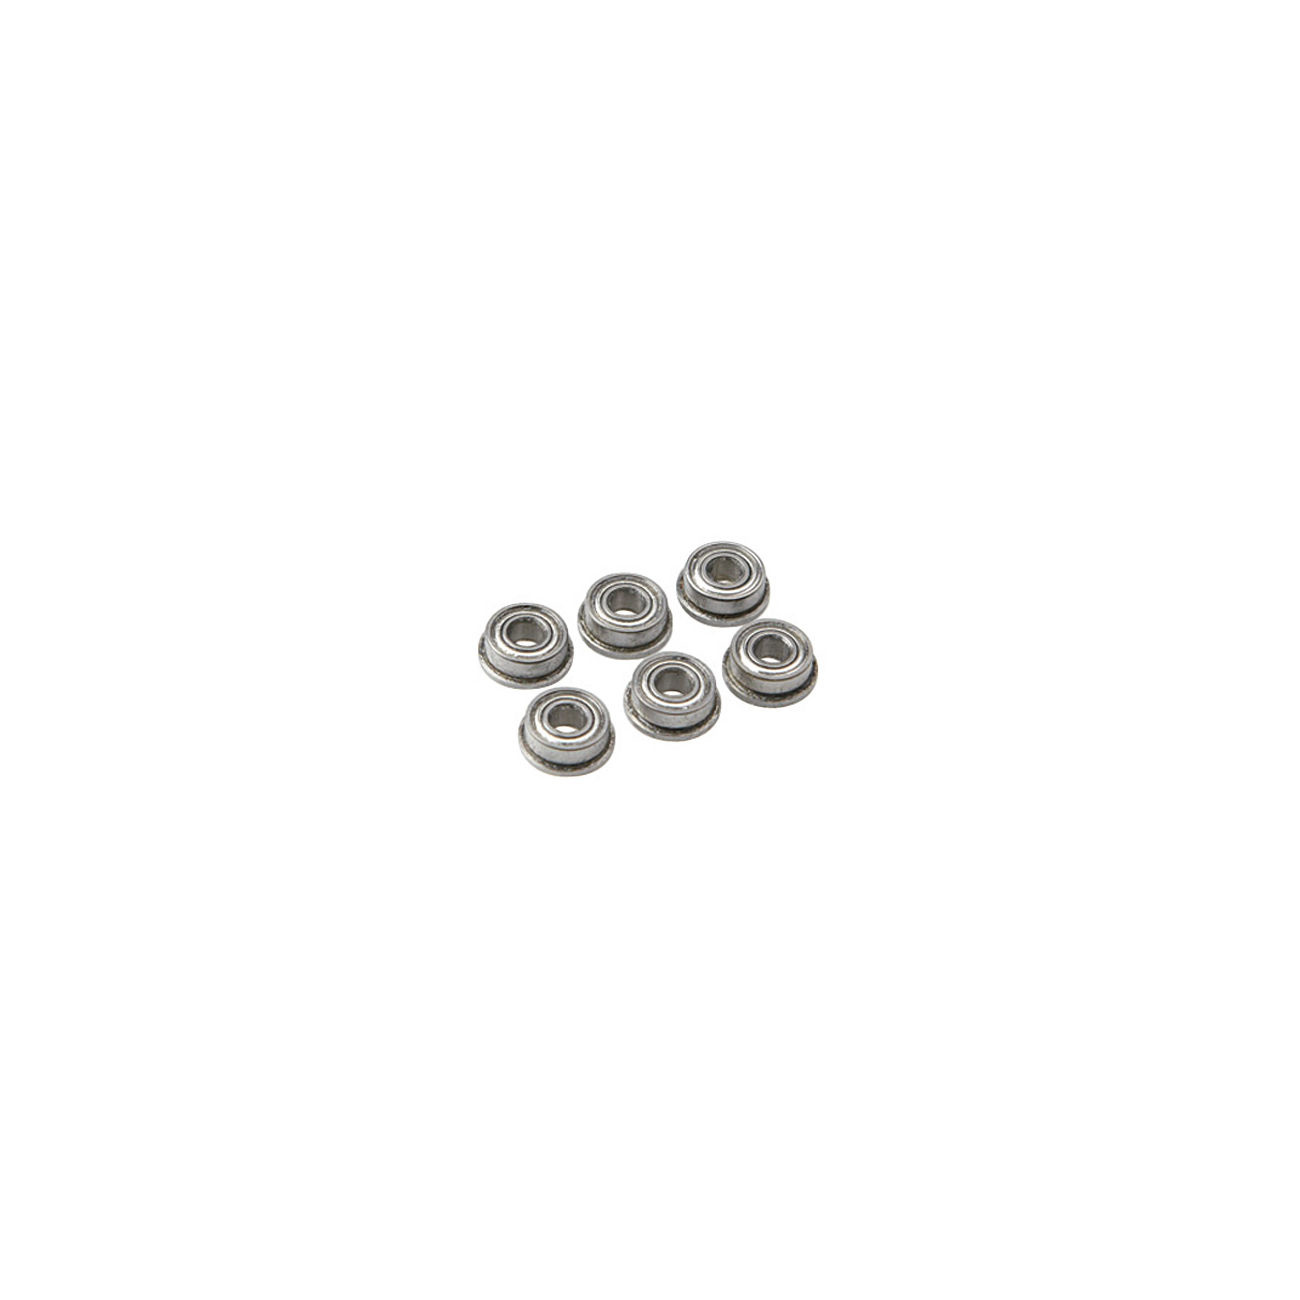 ASG Ultimate Smooth running Ball bearings 7 mm - 6 pieces